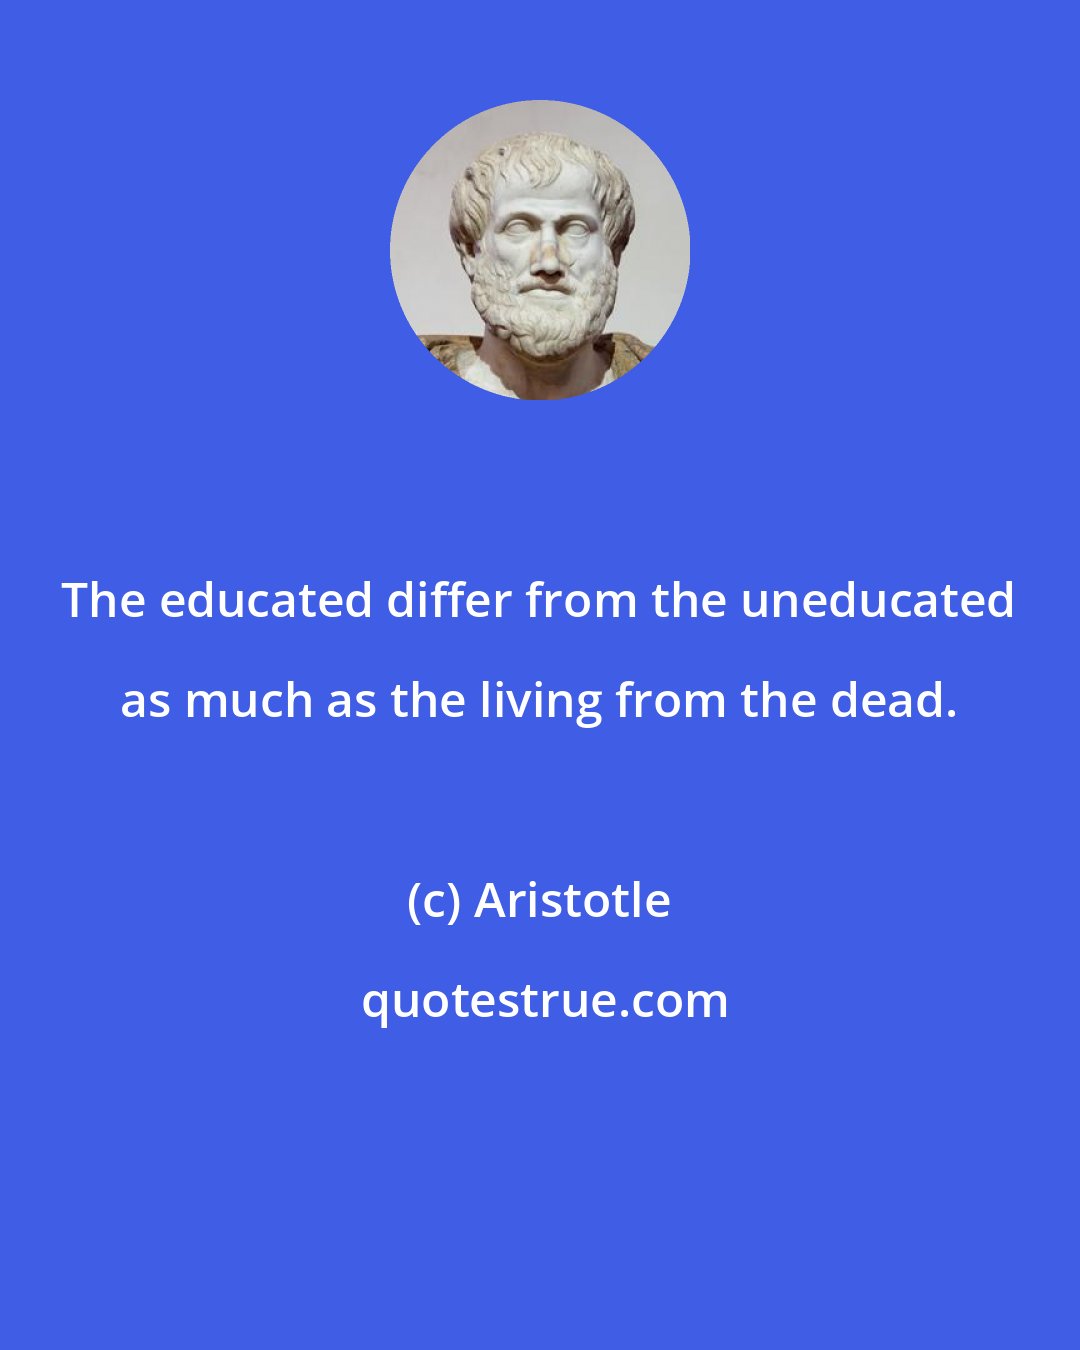 Aristotle: The educated differ from the uneducated as much as the living from the dead.